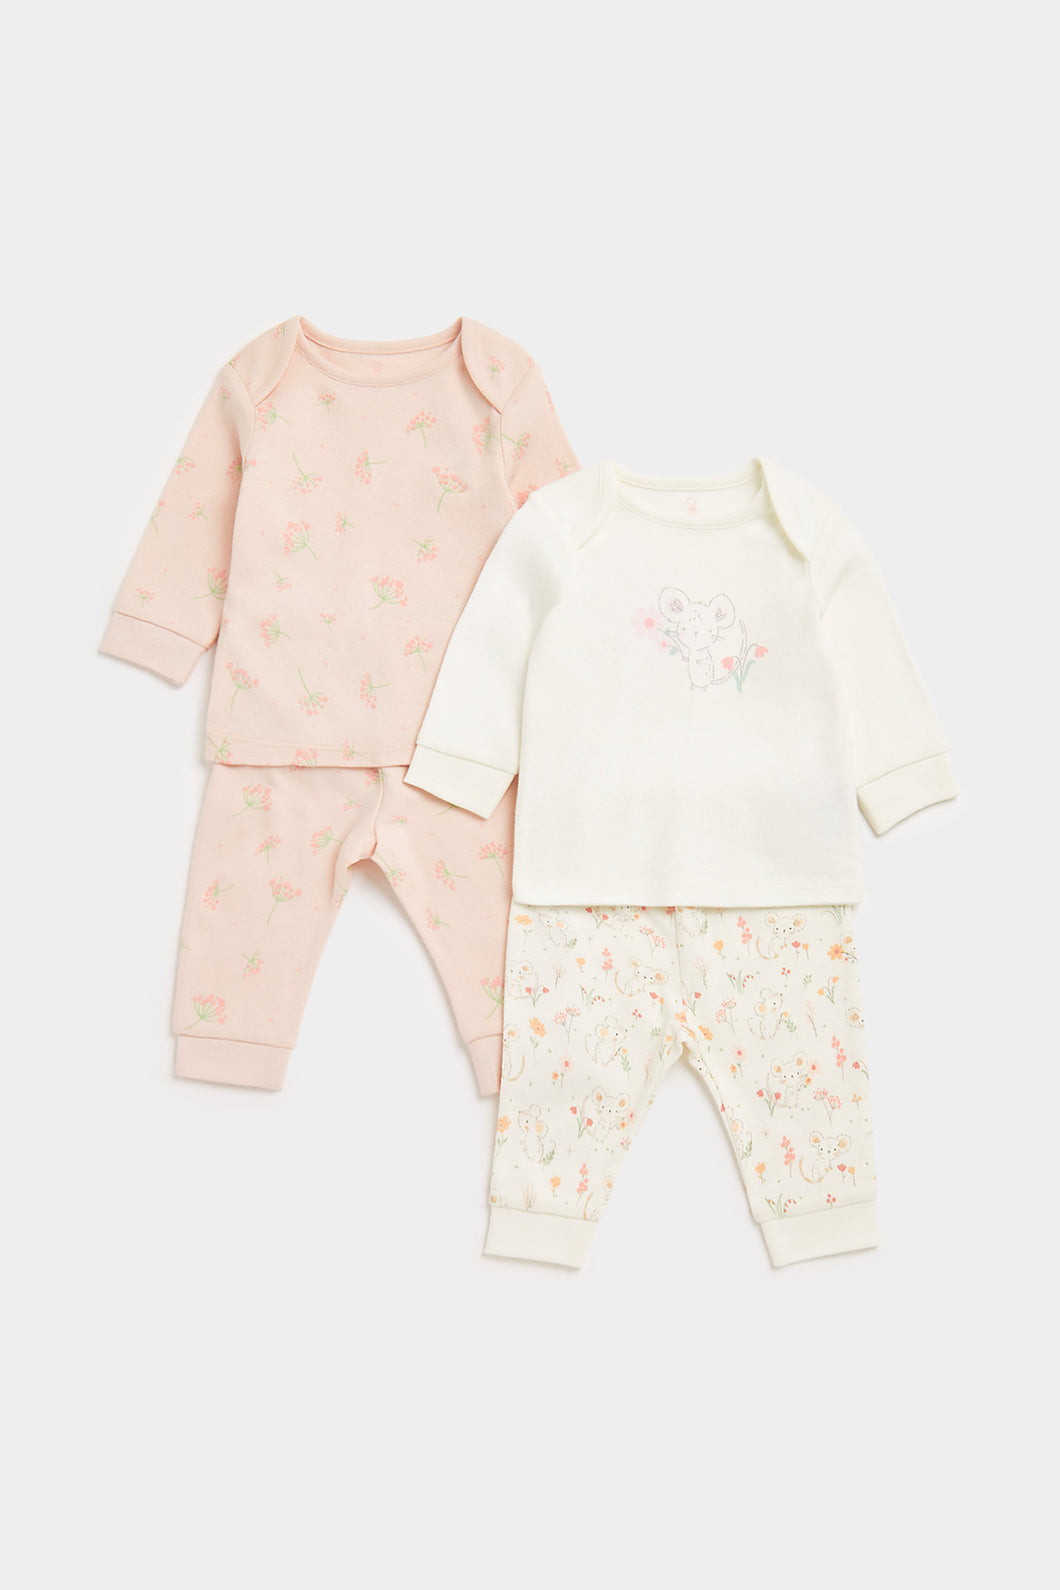 Mothercare Little Mouse Baby Pyjamas - 2 Pack